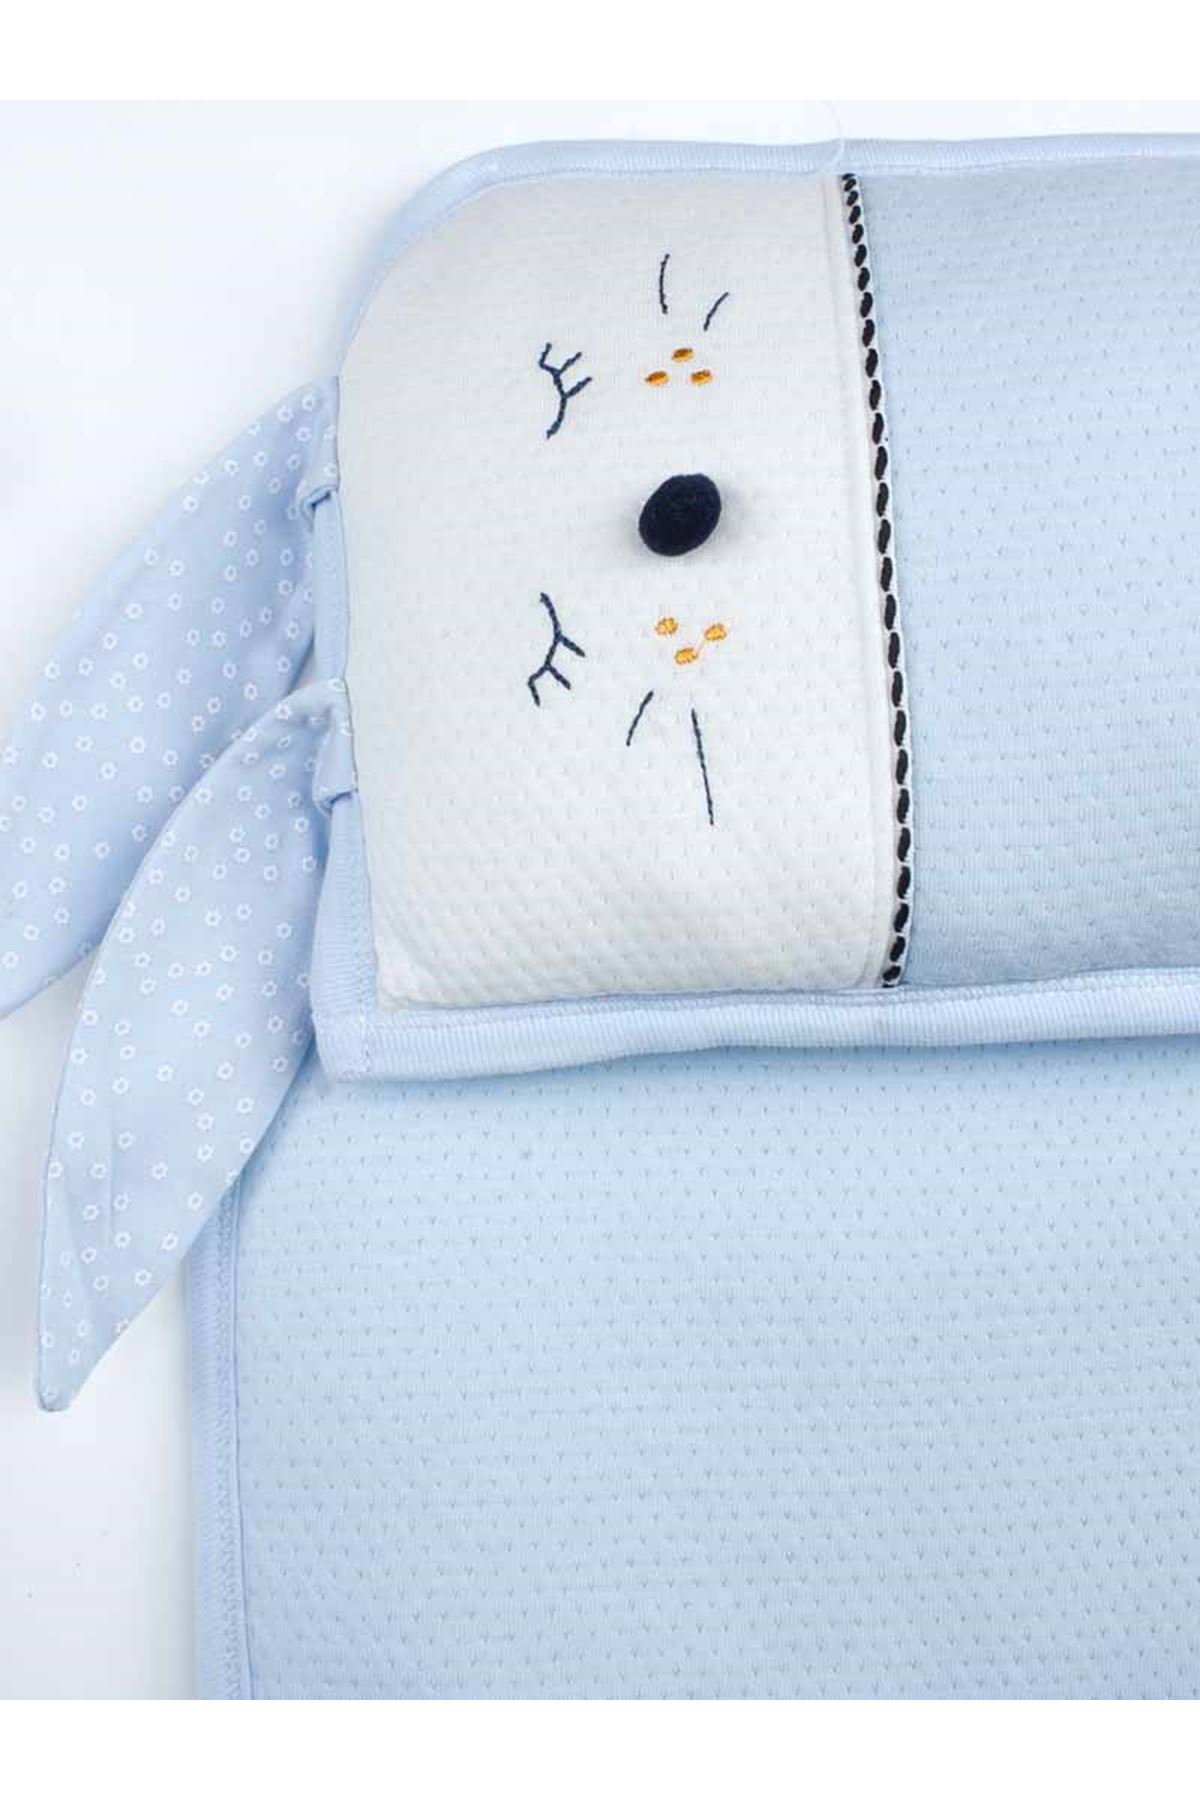 Blue Baby Boy Blanket Pillow and Swaddle Bottom Opening Set